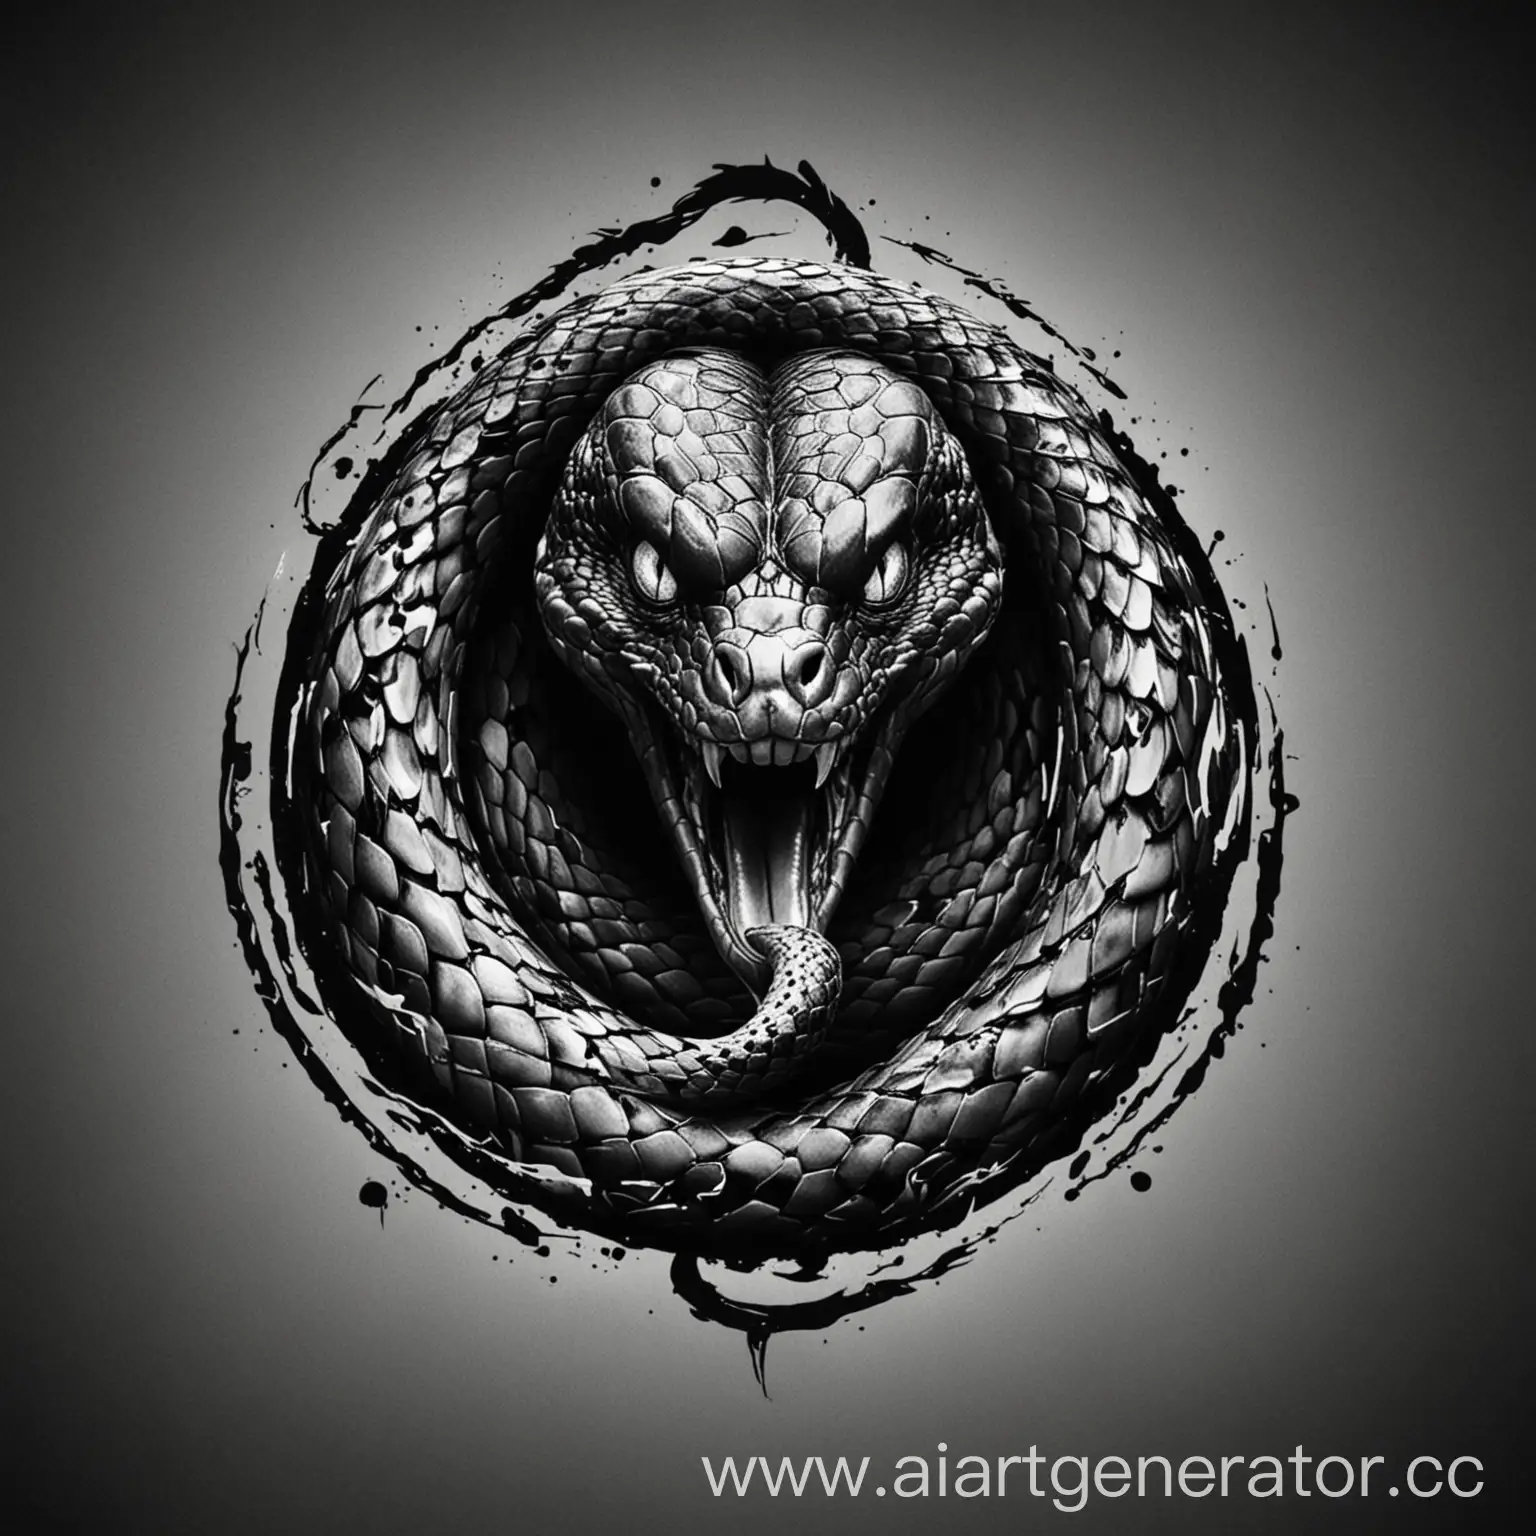 Abstract-Black-and-White-Snake-Artwork-Wild-Serpent-of-Anger-and-Inspiration